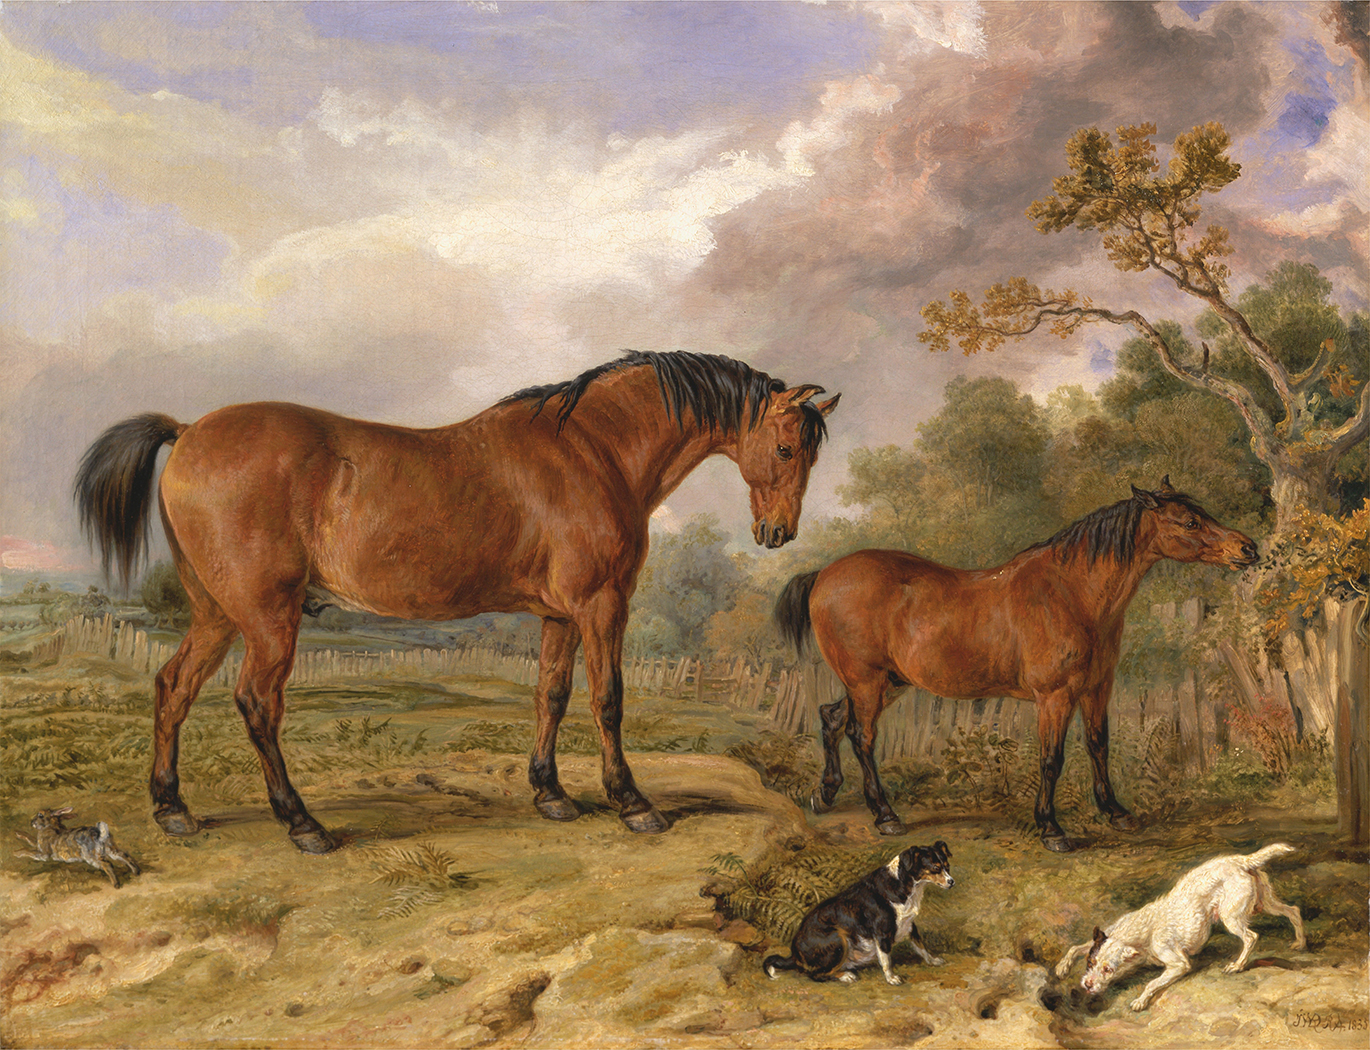 Equestrian/Fox Dogs Two Horses with Dogs and Rabbit Framed ...